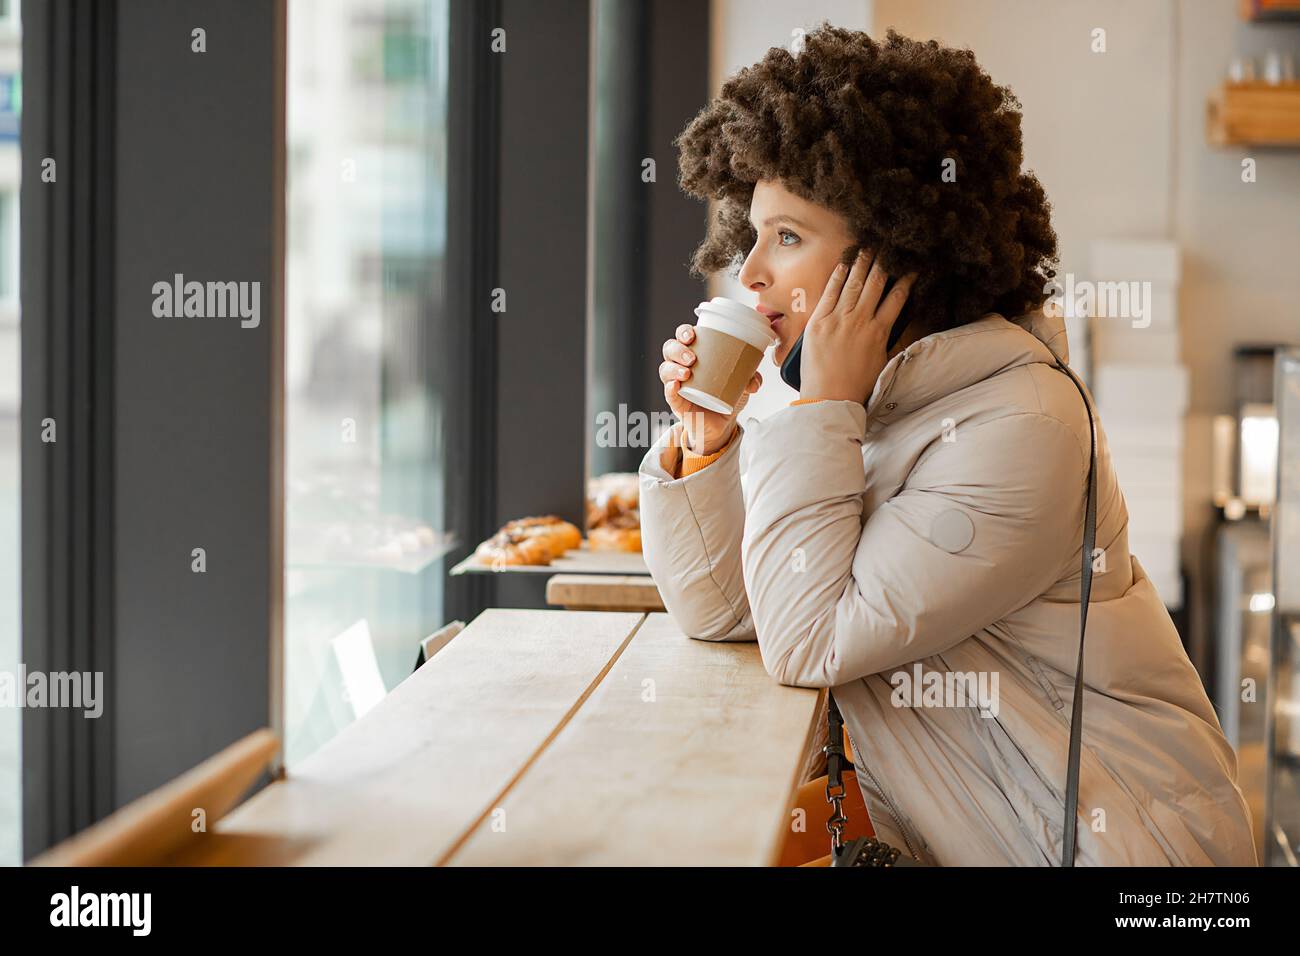 Woman with smart phone in cafe, Afro Hairstyle, drinking caffee or tea, looking through window, enjoying moment, happy hours Stock Photo